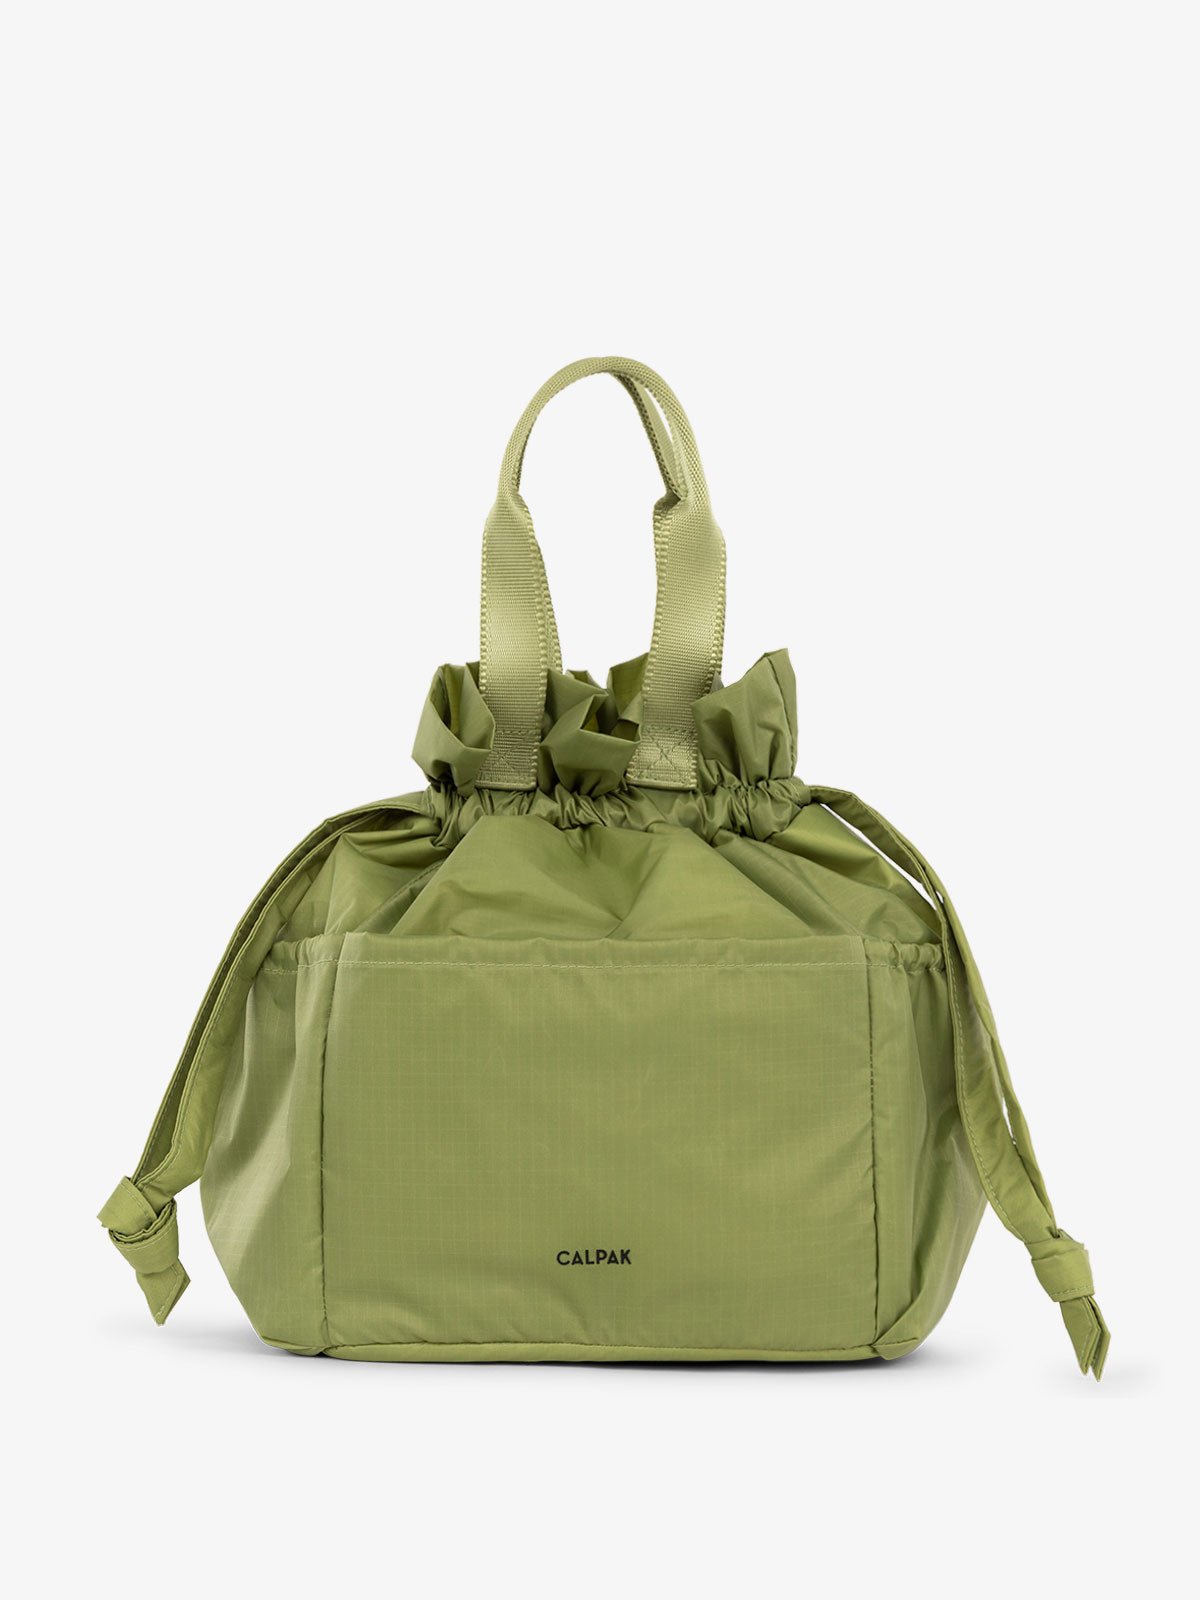 CALPAK Insulated Lunch Bag in palm